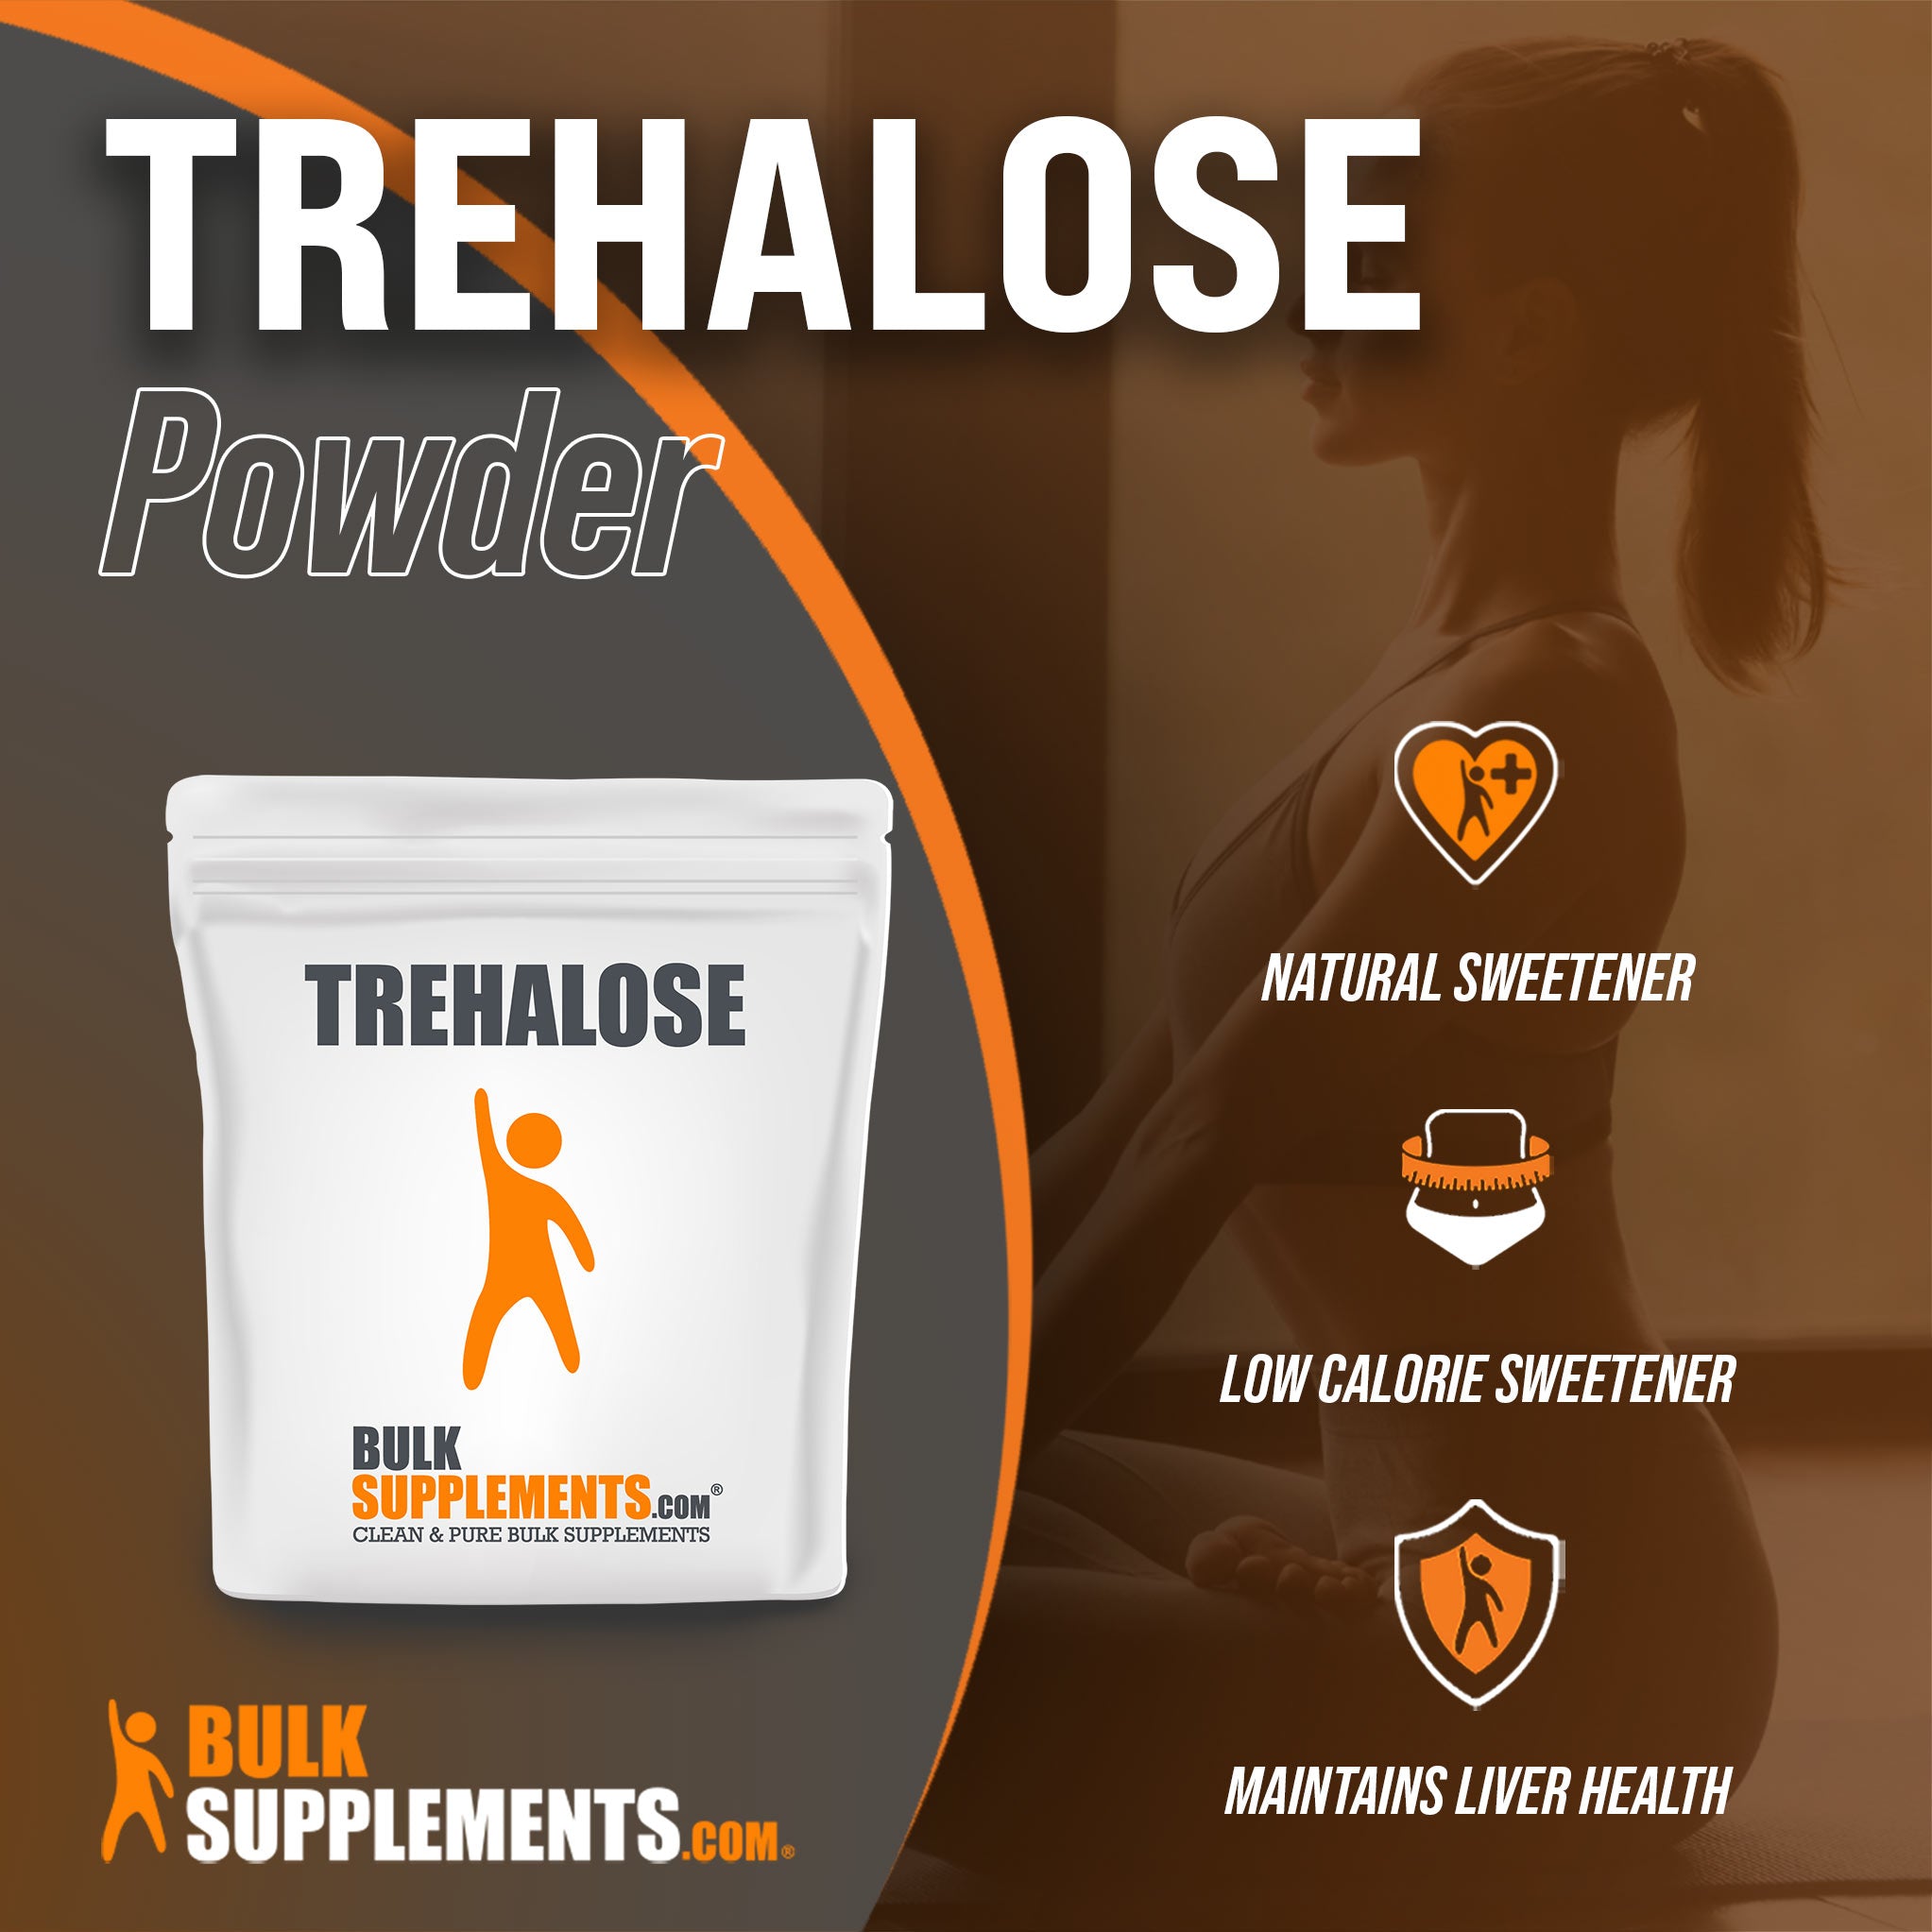 Benefits of Trehalose: natural sweetener, low calorie sweetener, maintains liver health